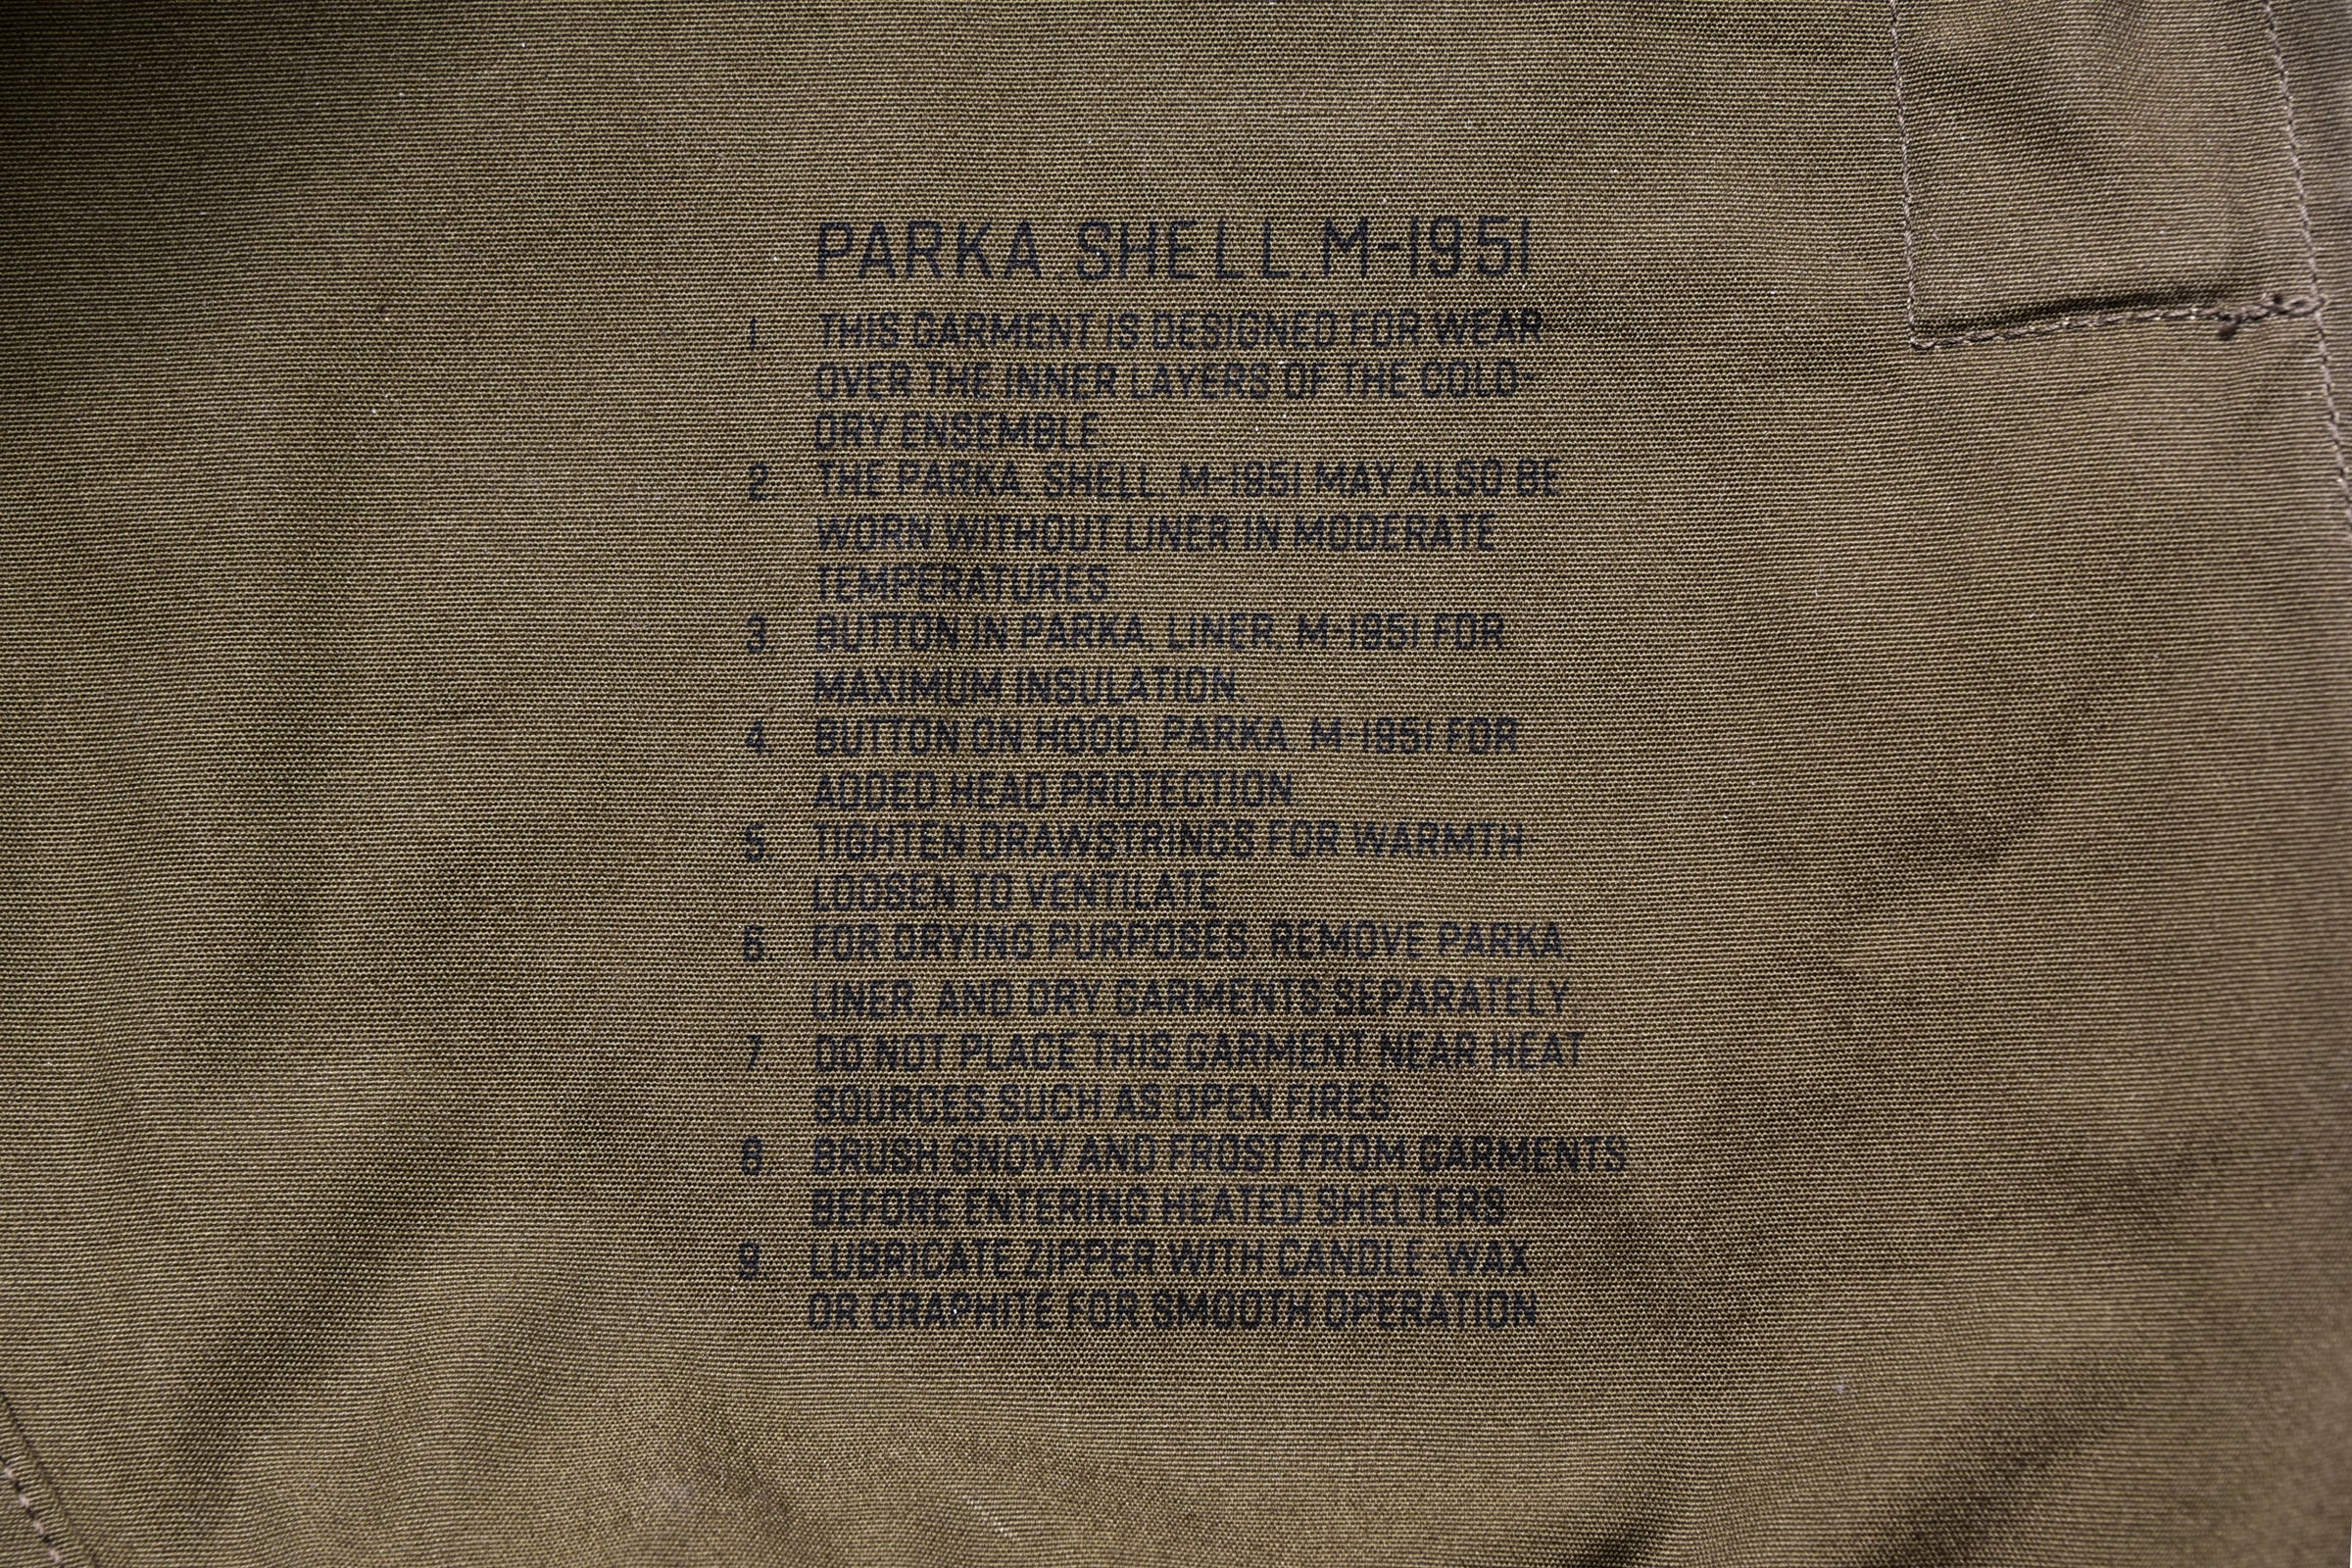 PARKA-SHELL, M-1951 (MODEL 220) – The Real McCoy's